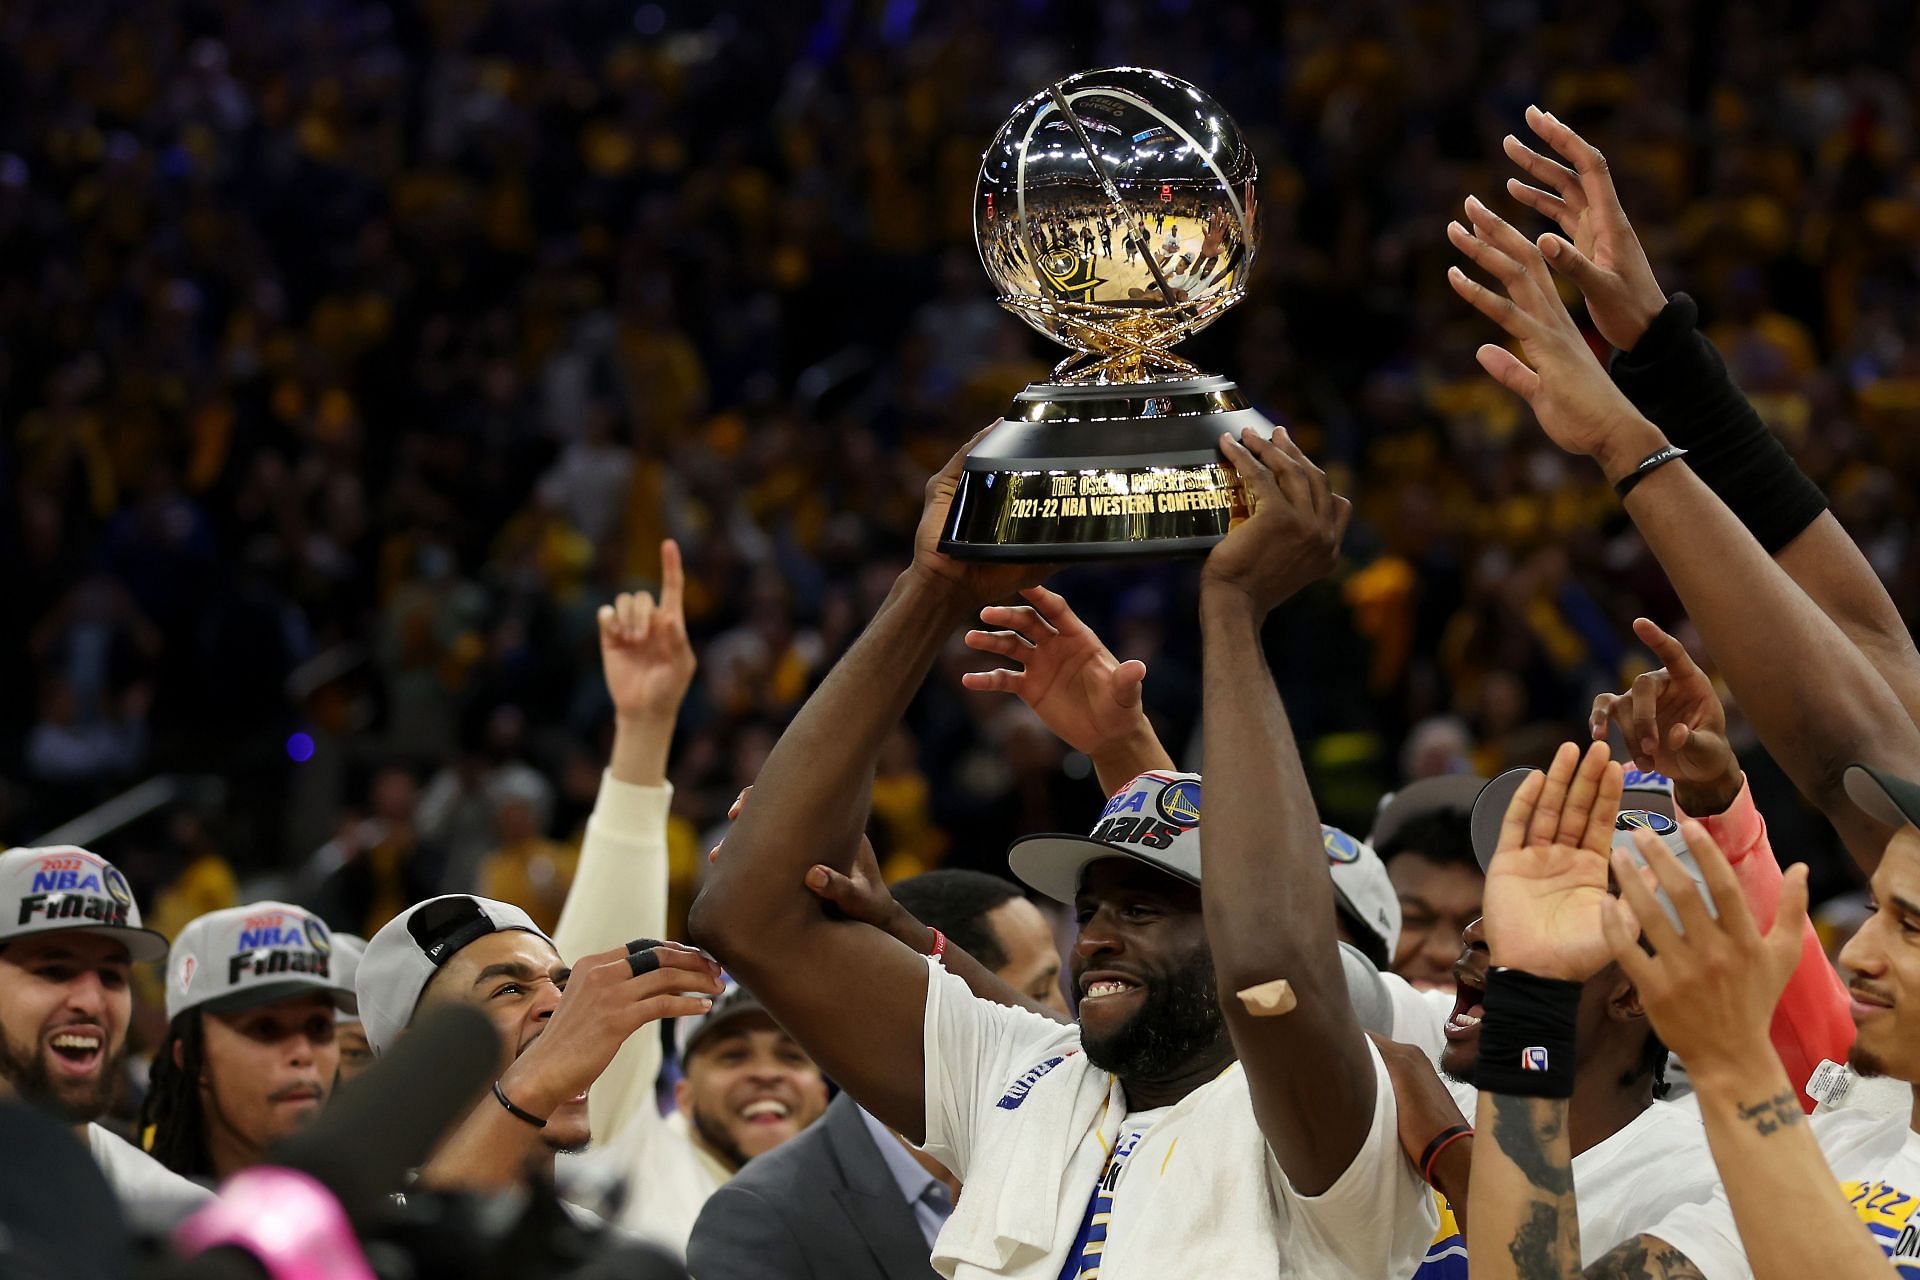 Draymond Green of the Golden State Warriors holds the Western Conference championship trophy.